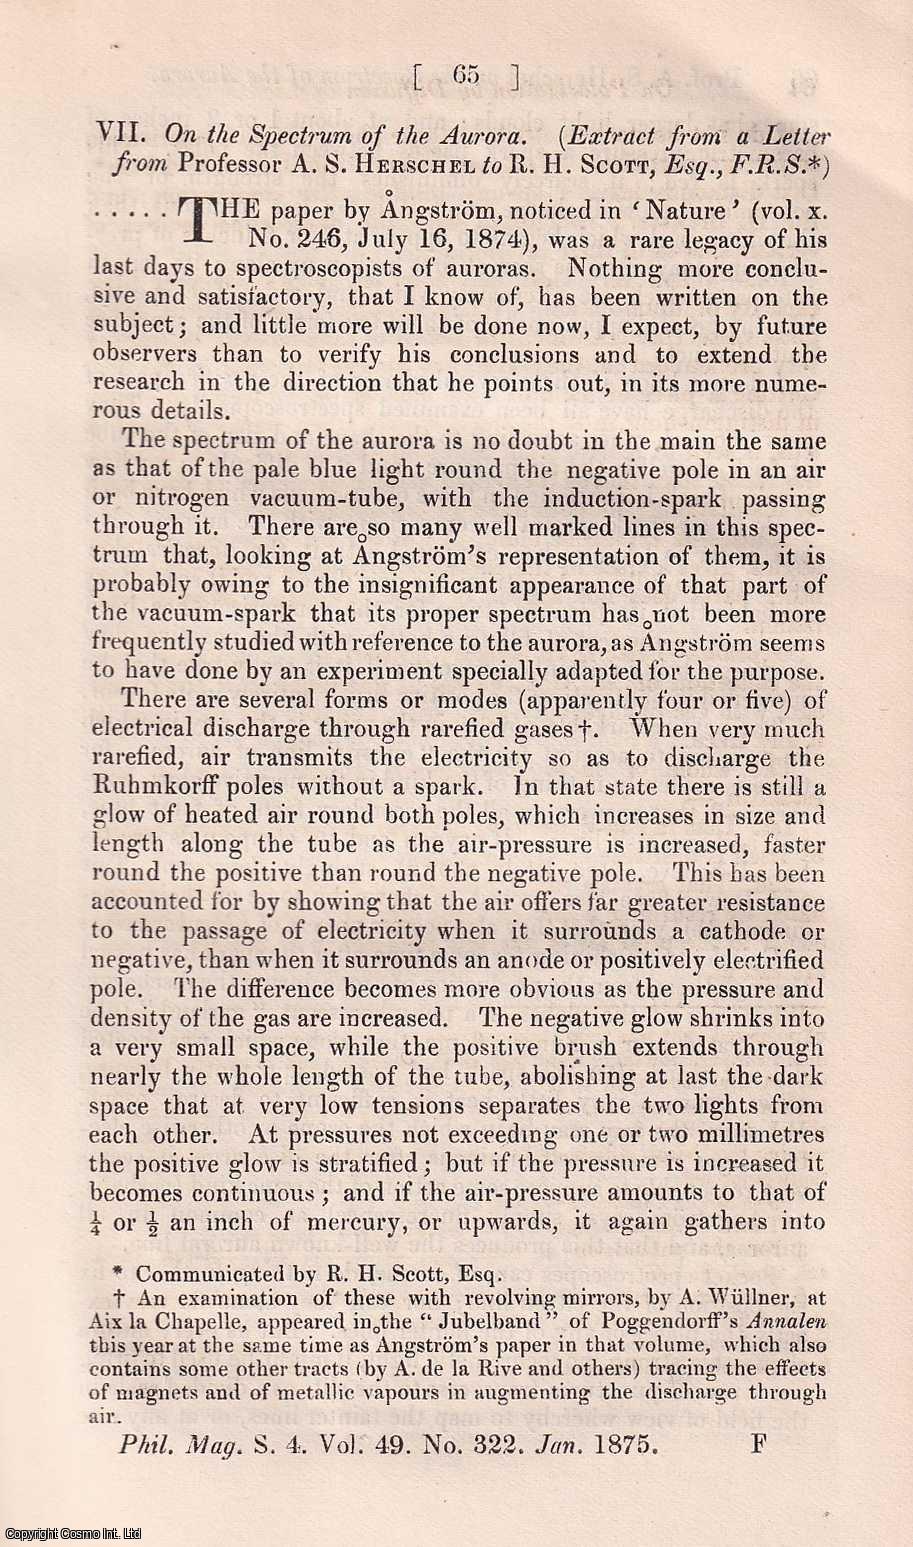 J.L. Soret - On Polarization by Diffusion of Light. An original article from The London, Edinburgh, and Dublin Philosophical Magazine and Journal of Science, 1875.